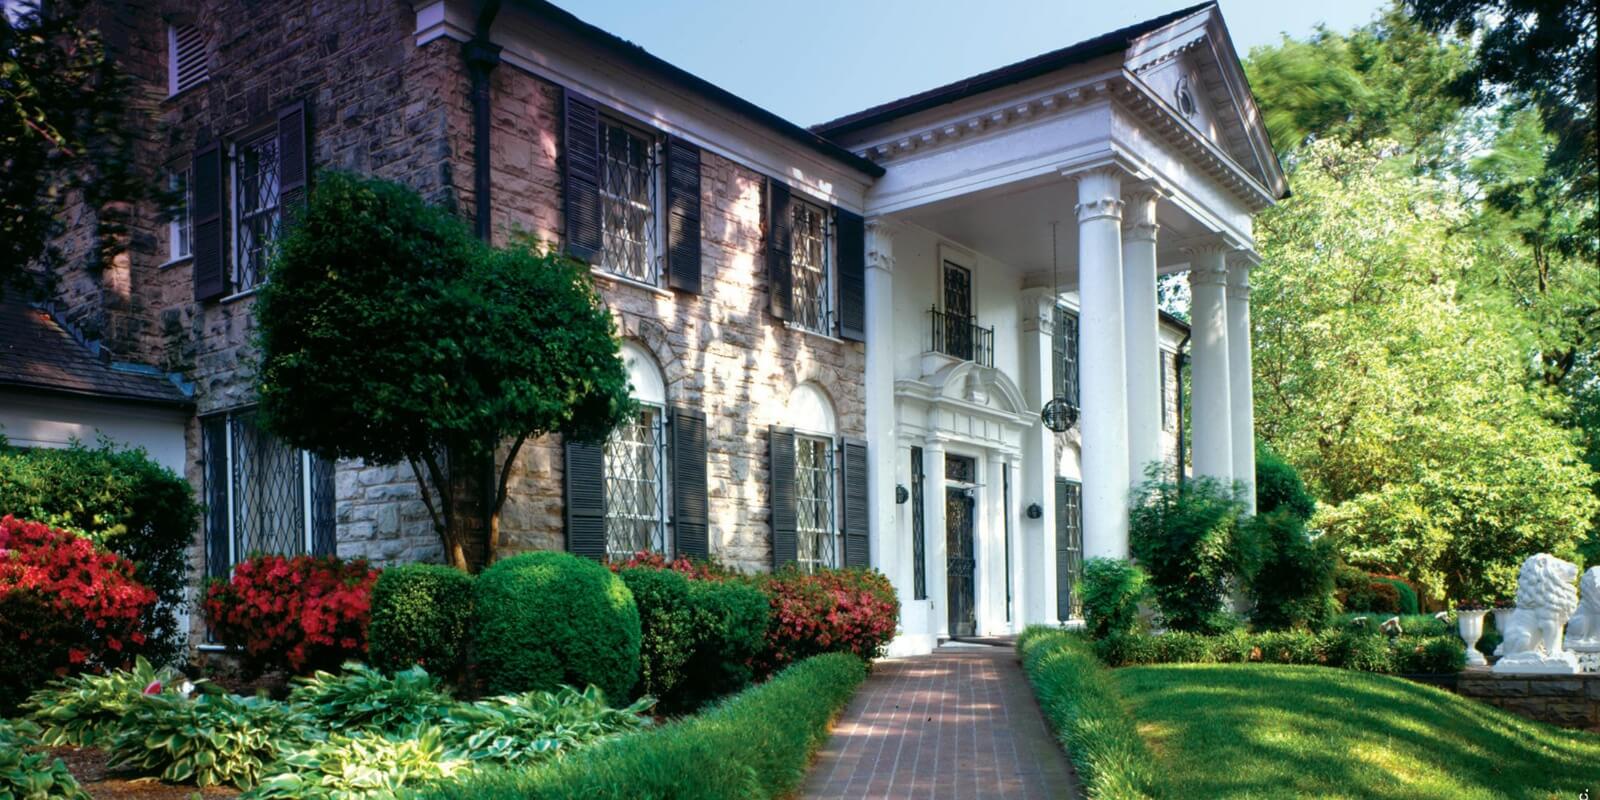 Graceland's exterior photographed in 2018.